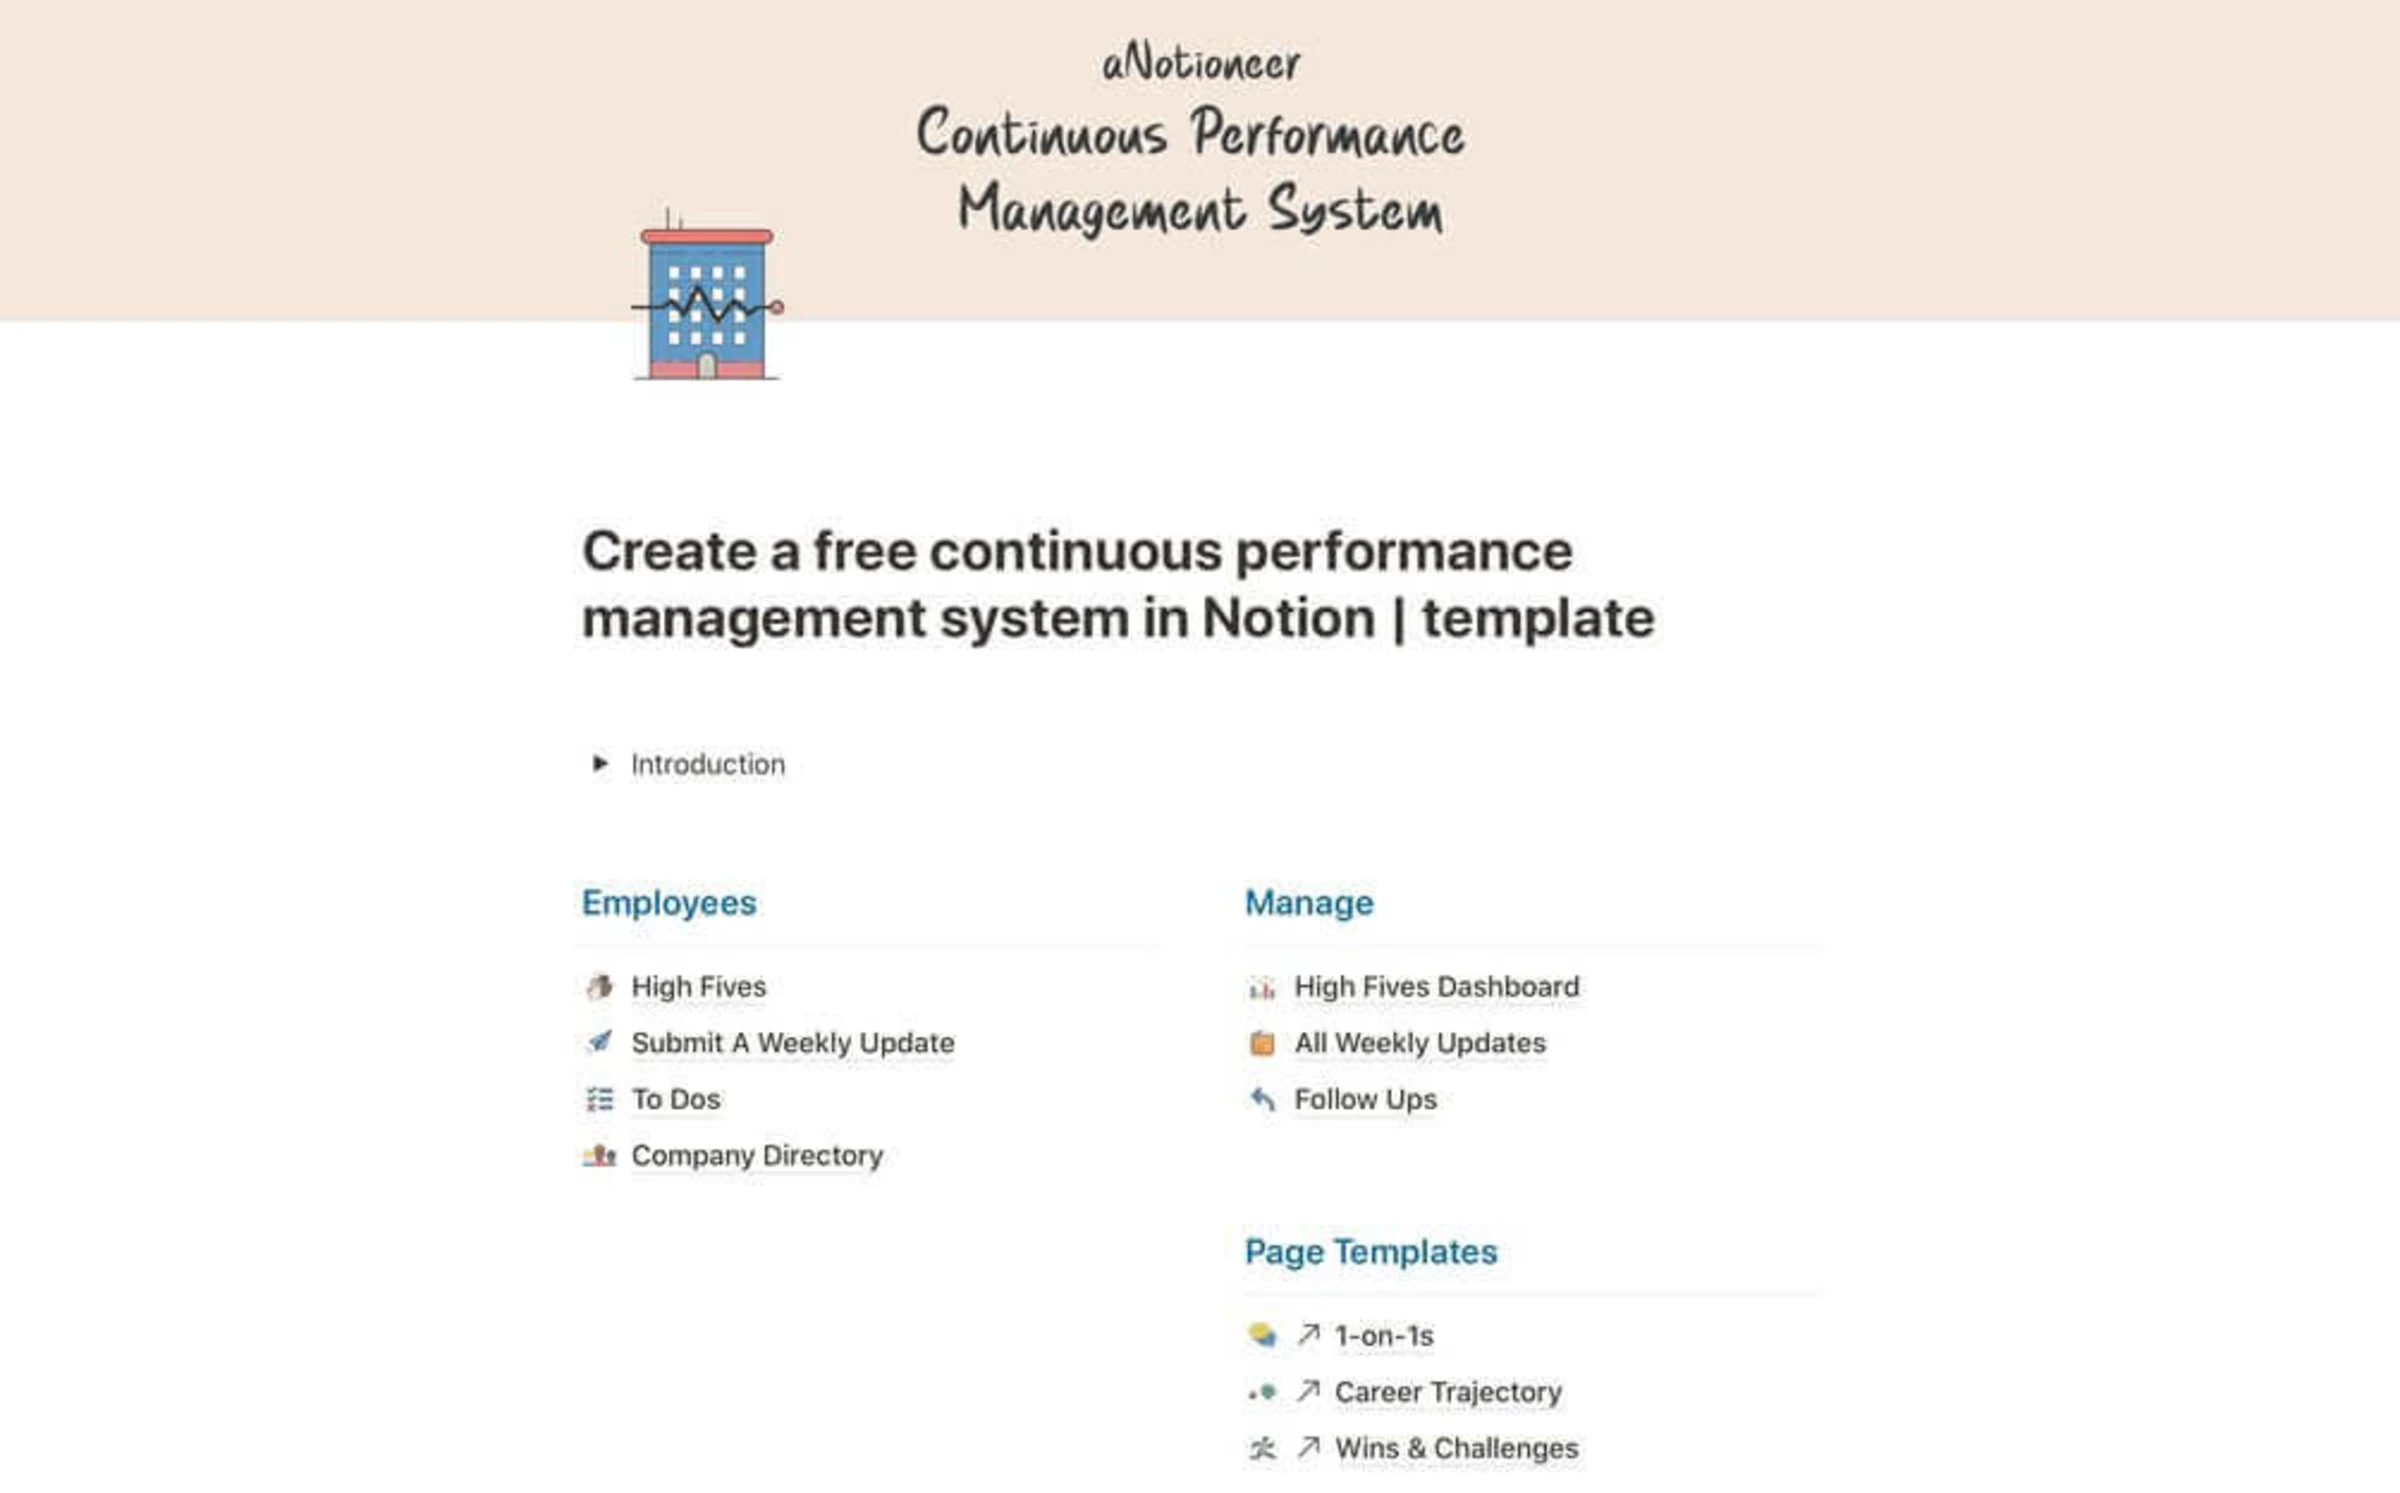 Continuous Performance Management System template